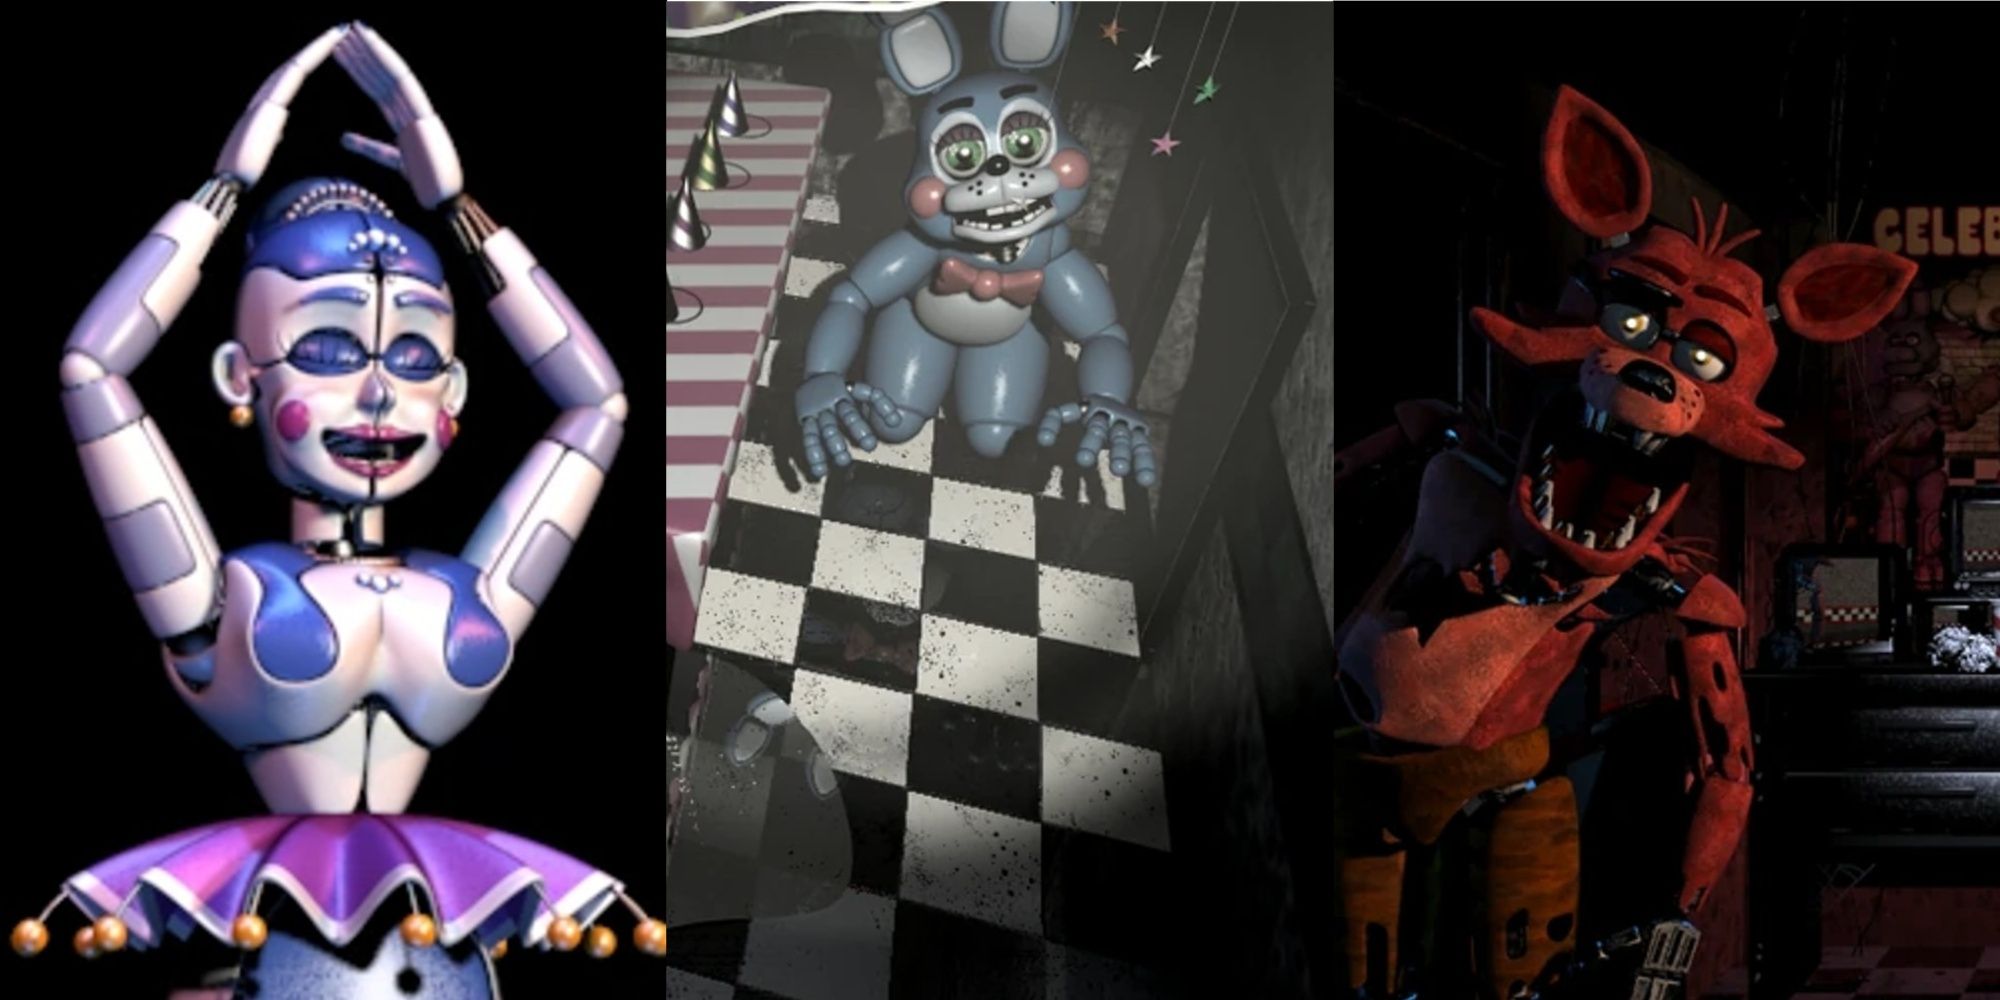 I got: The Puppet.! Wich fnaf 2 withered animatronic are you